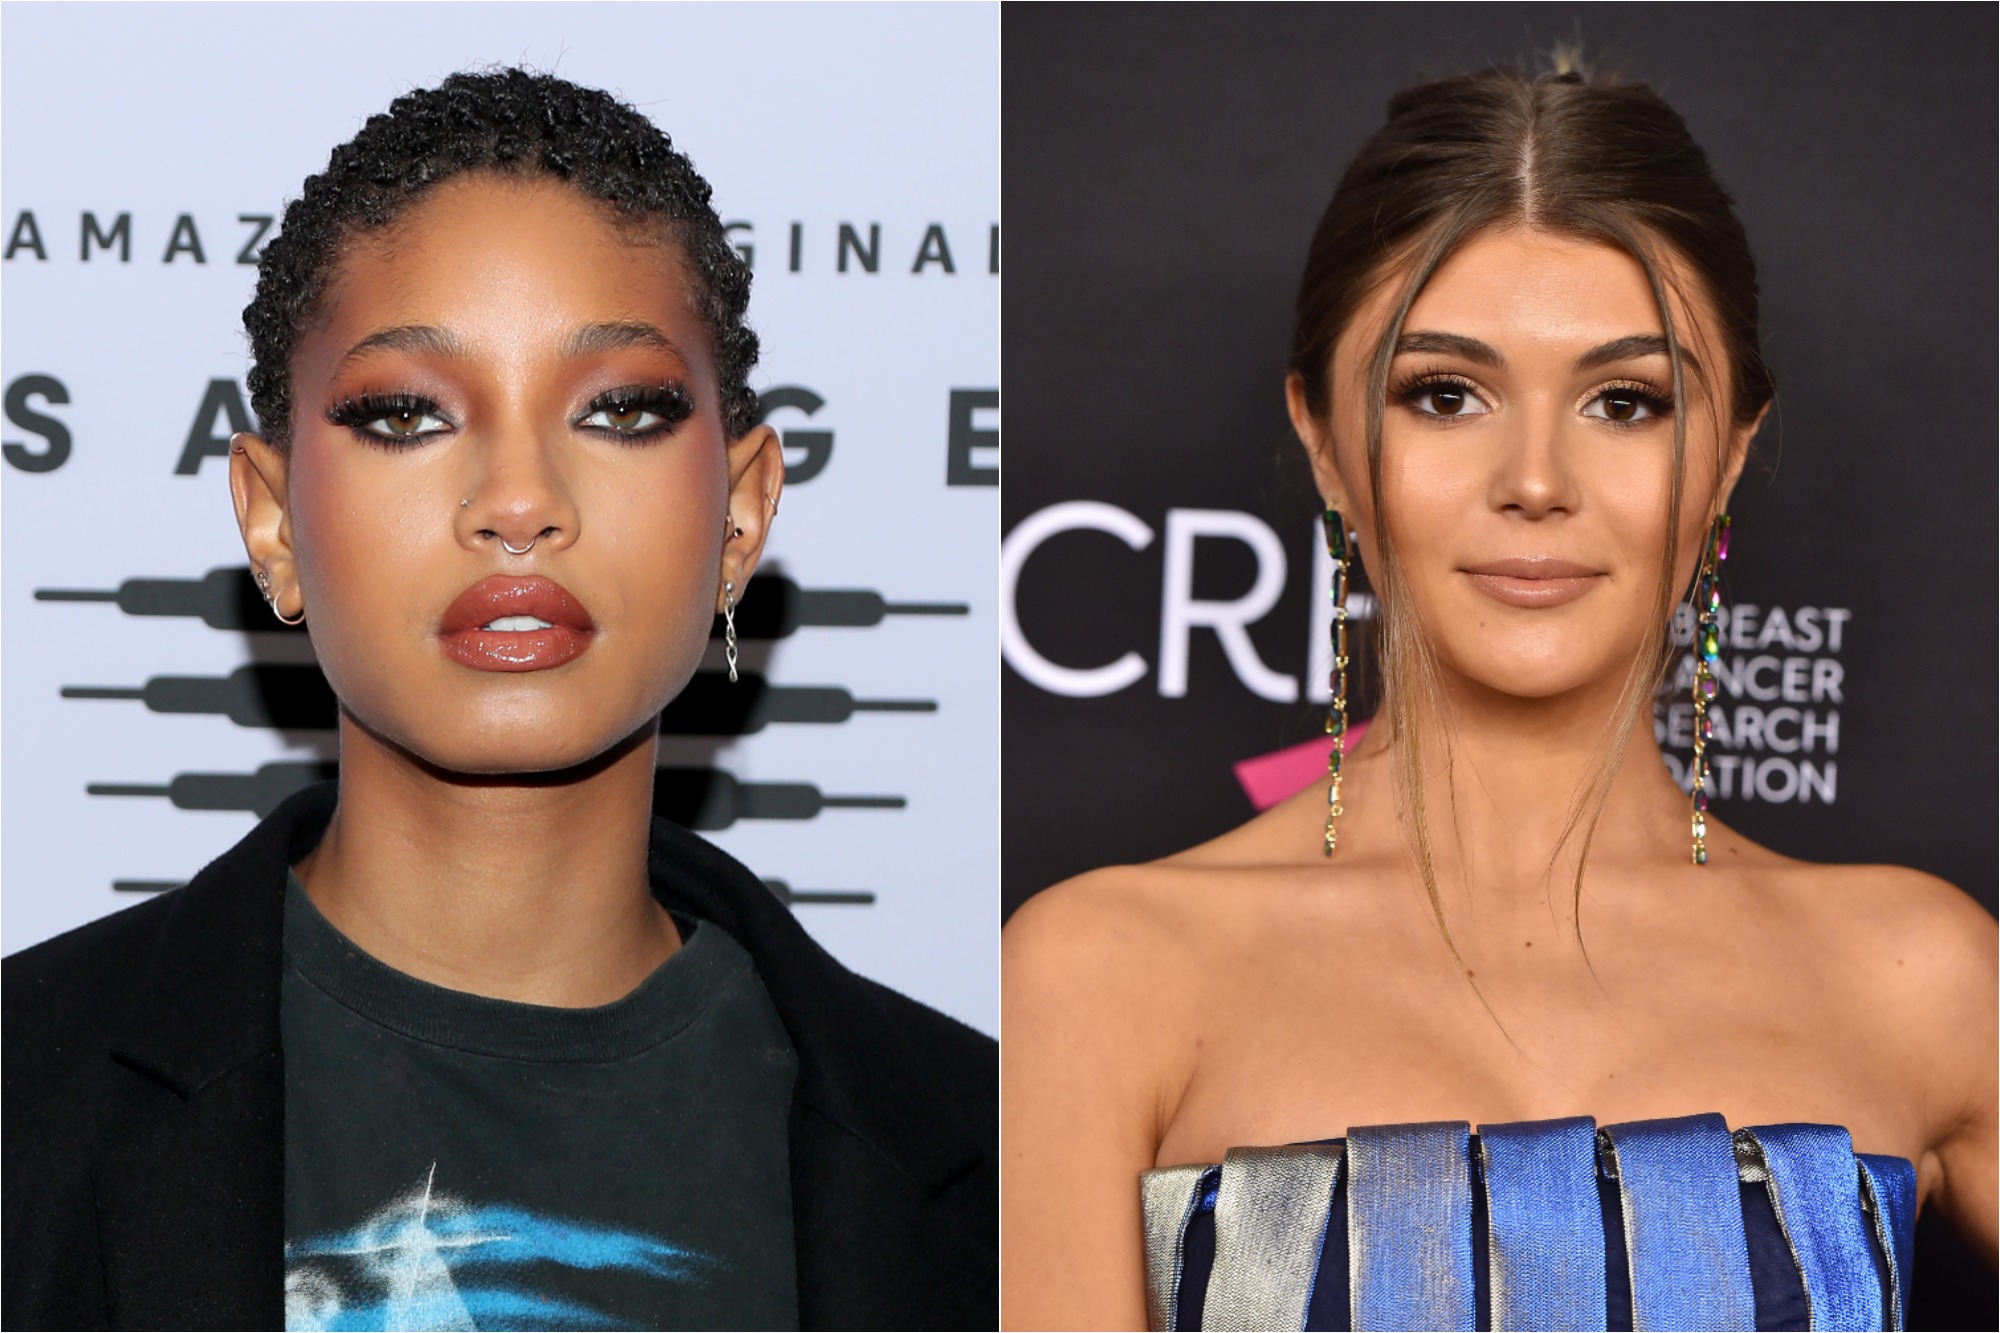 (L) Willow Smith at Rihanna's Savage X Fenty Show Vol. 2 presented by Amazon Prime Video on Oct. 2, 2020 / (R) Olivia Jade Giannulli at The Women's Cancer Research Fund's An Unforgettable Evening Benefit Gala on Feb. 28, 2019